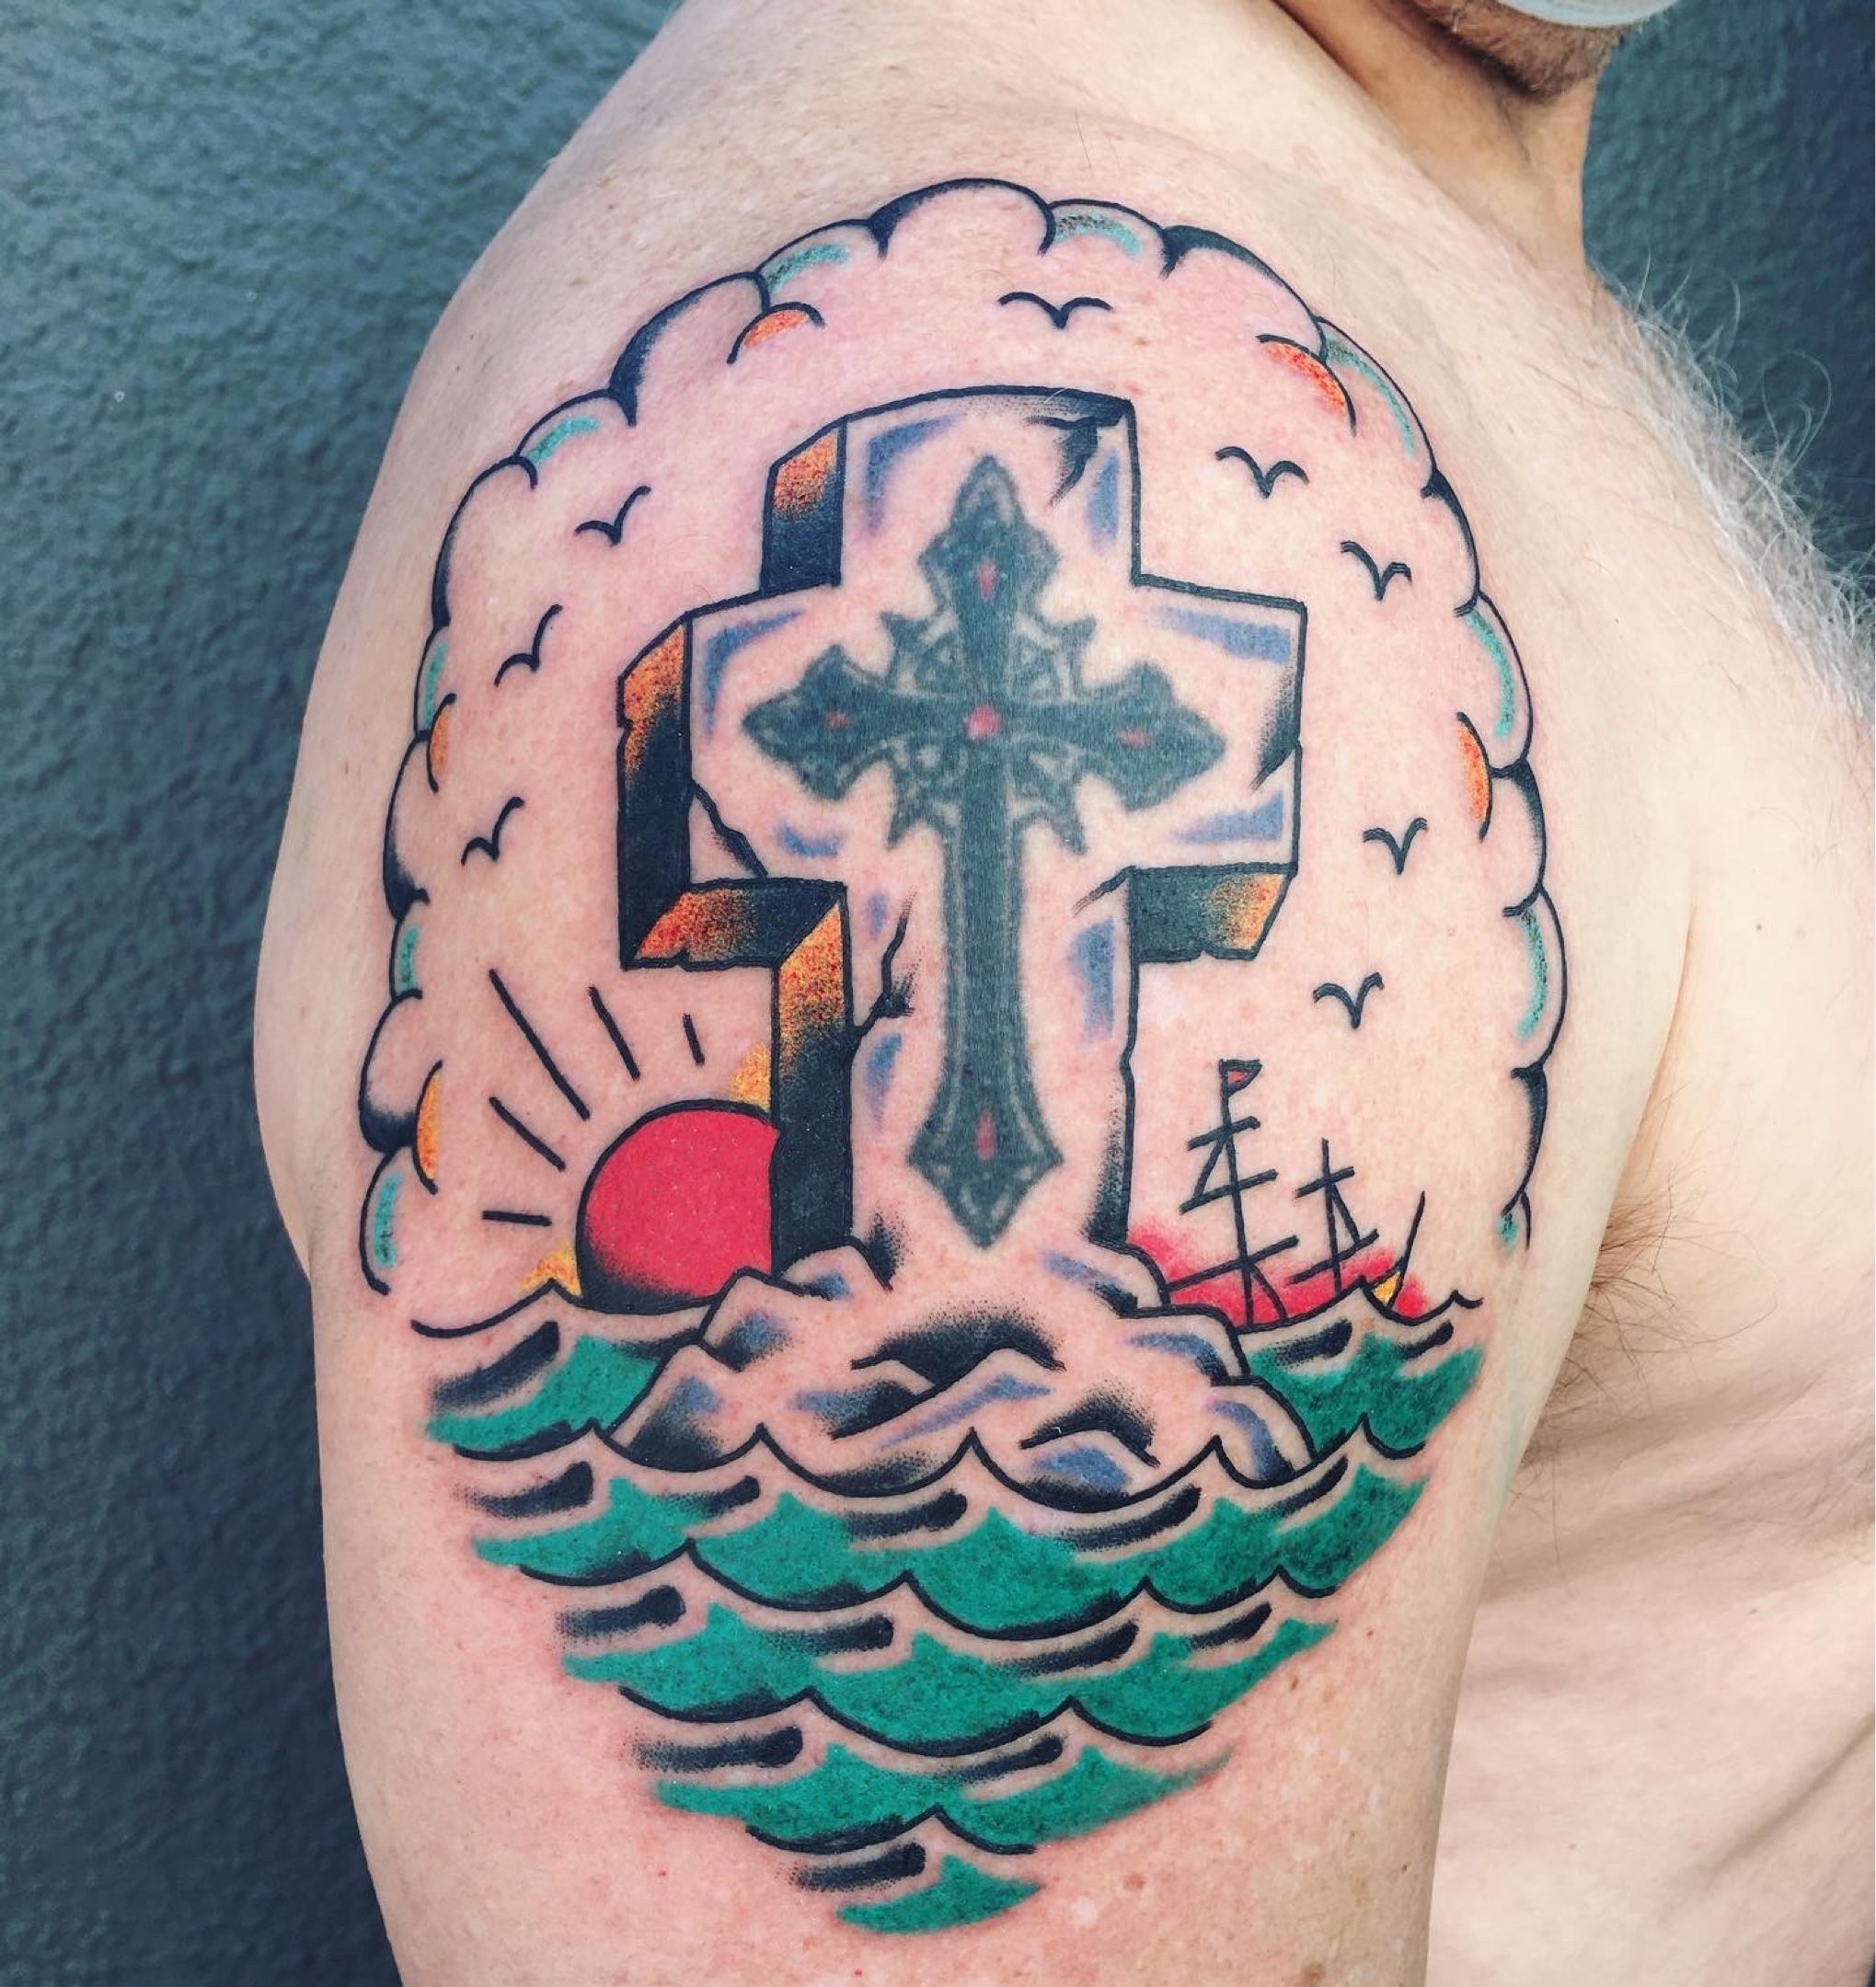 I found this cross when looking for good christian tattoo ideas does anyone  know what these signs at the bottom of the cross mean? : r/Christianity